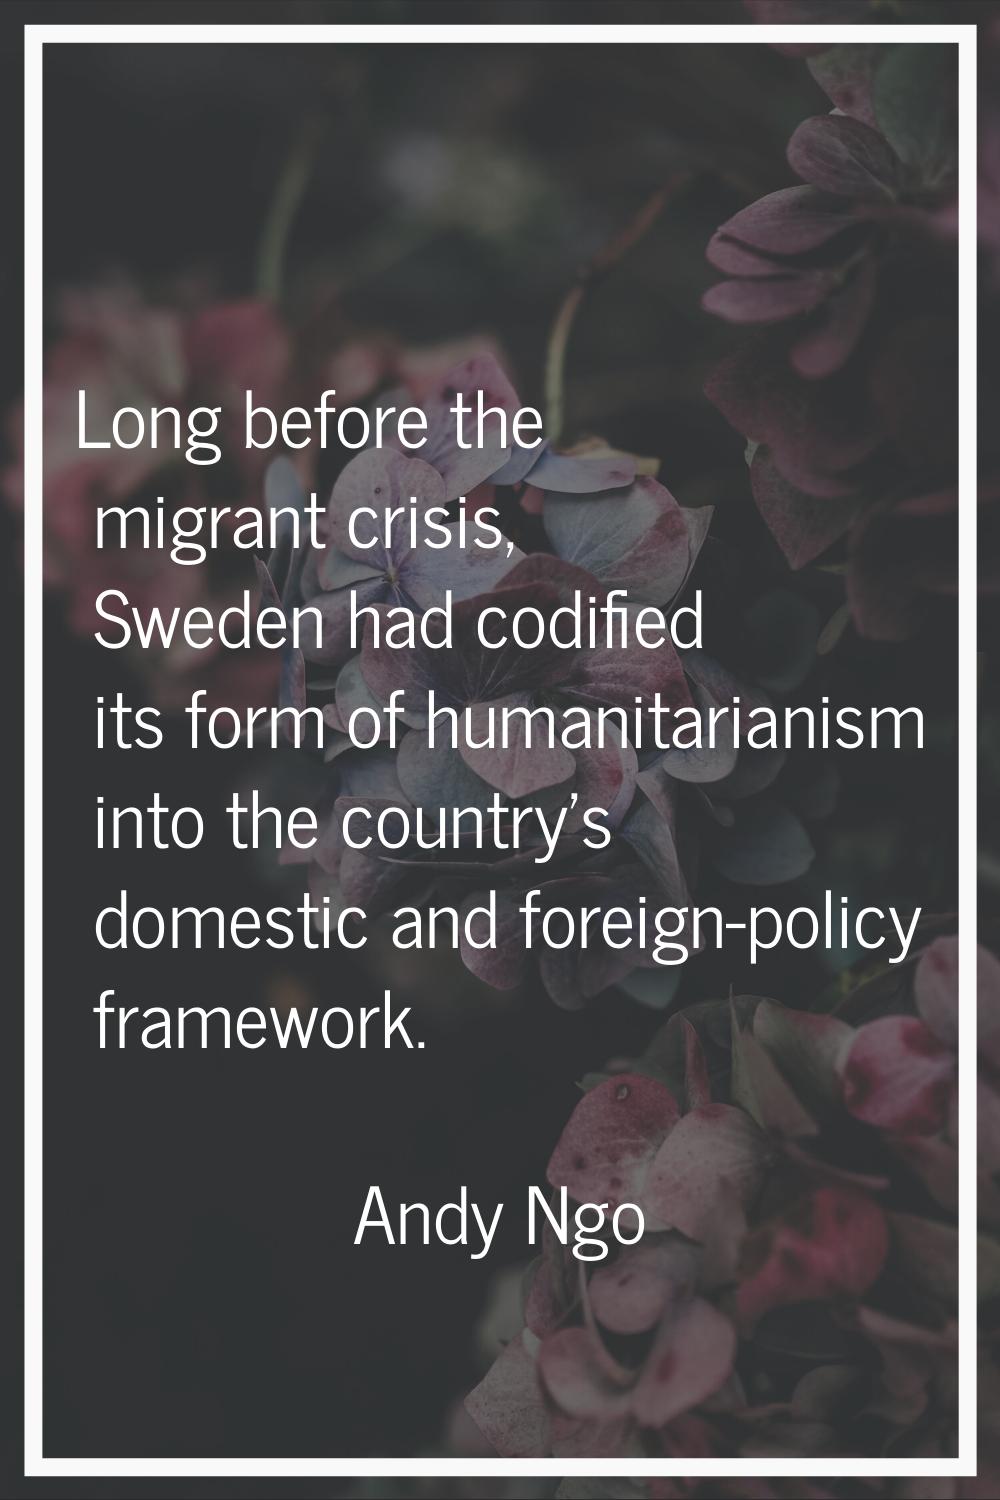 Long before the migrant crisis, Sweden had codified its form of humanitarianism into the country's 